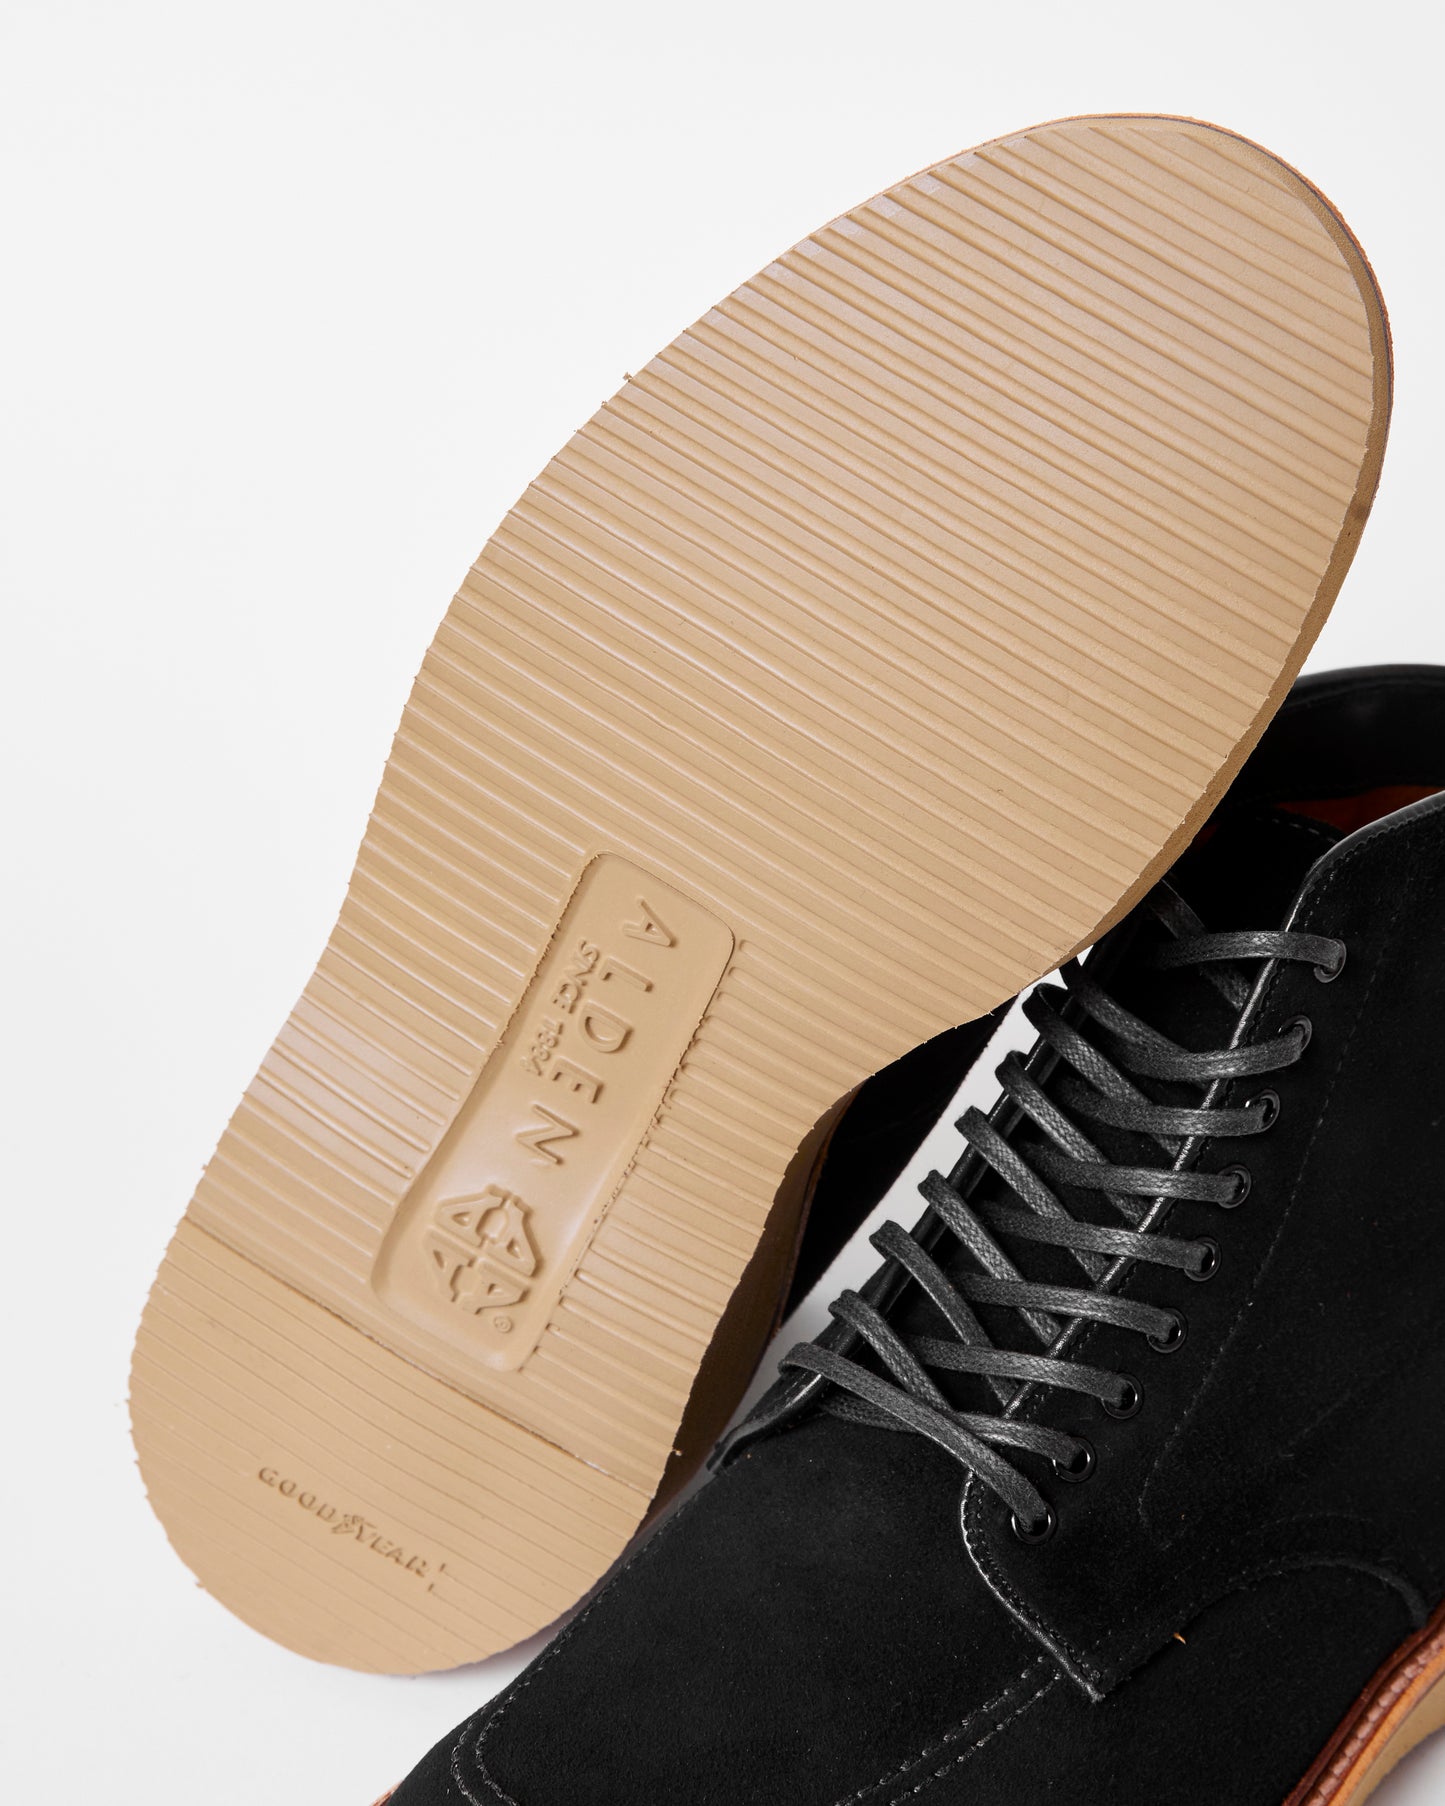 "Maples" Indy Boot in Black Suede, Trubalance Last